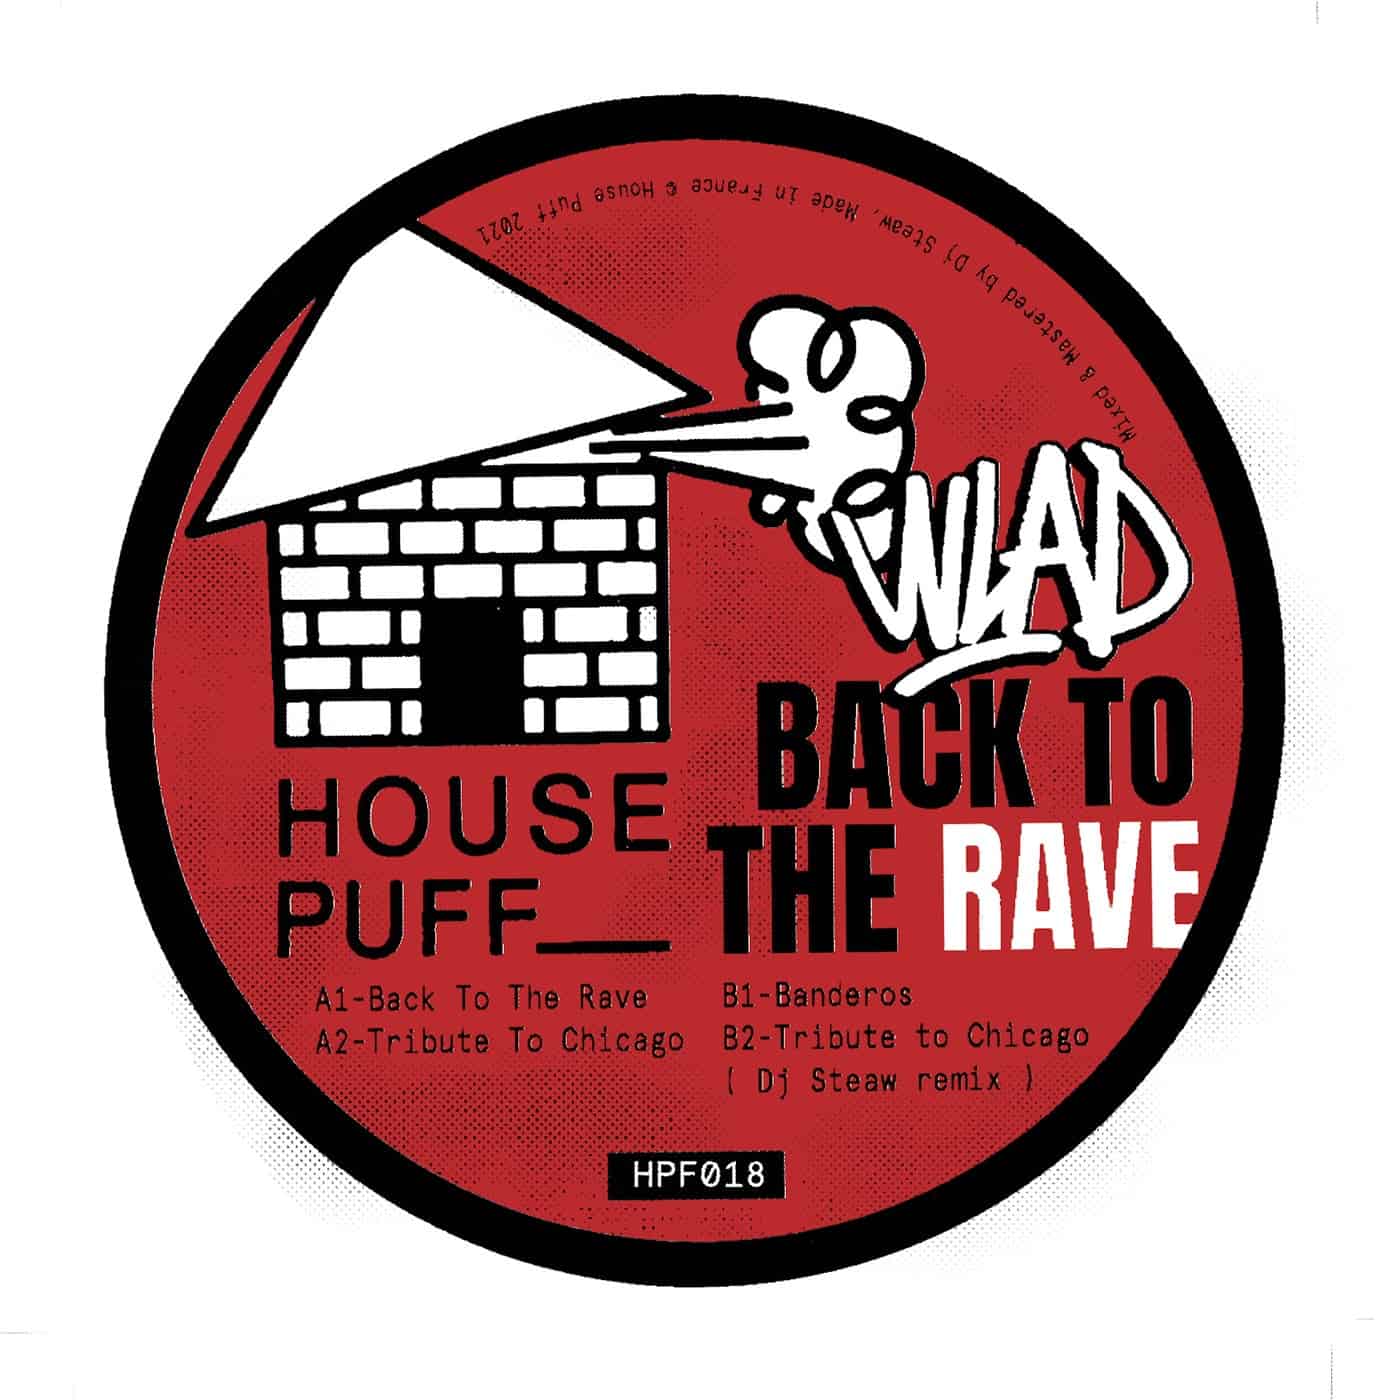 Download WLAD - Back To The Rave EP on Electrobuzz